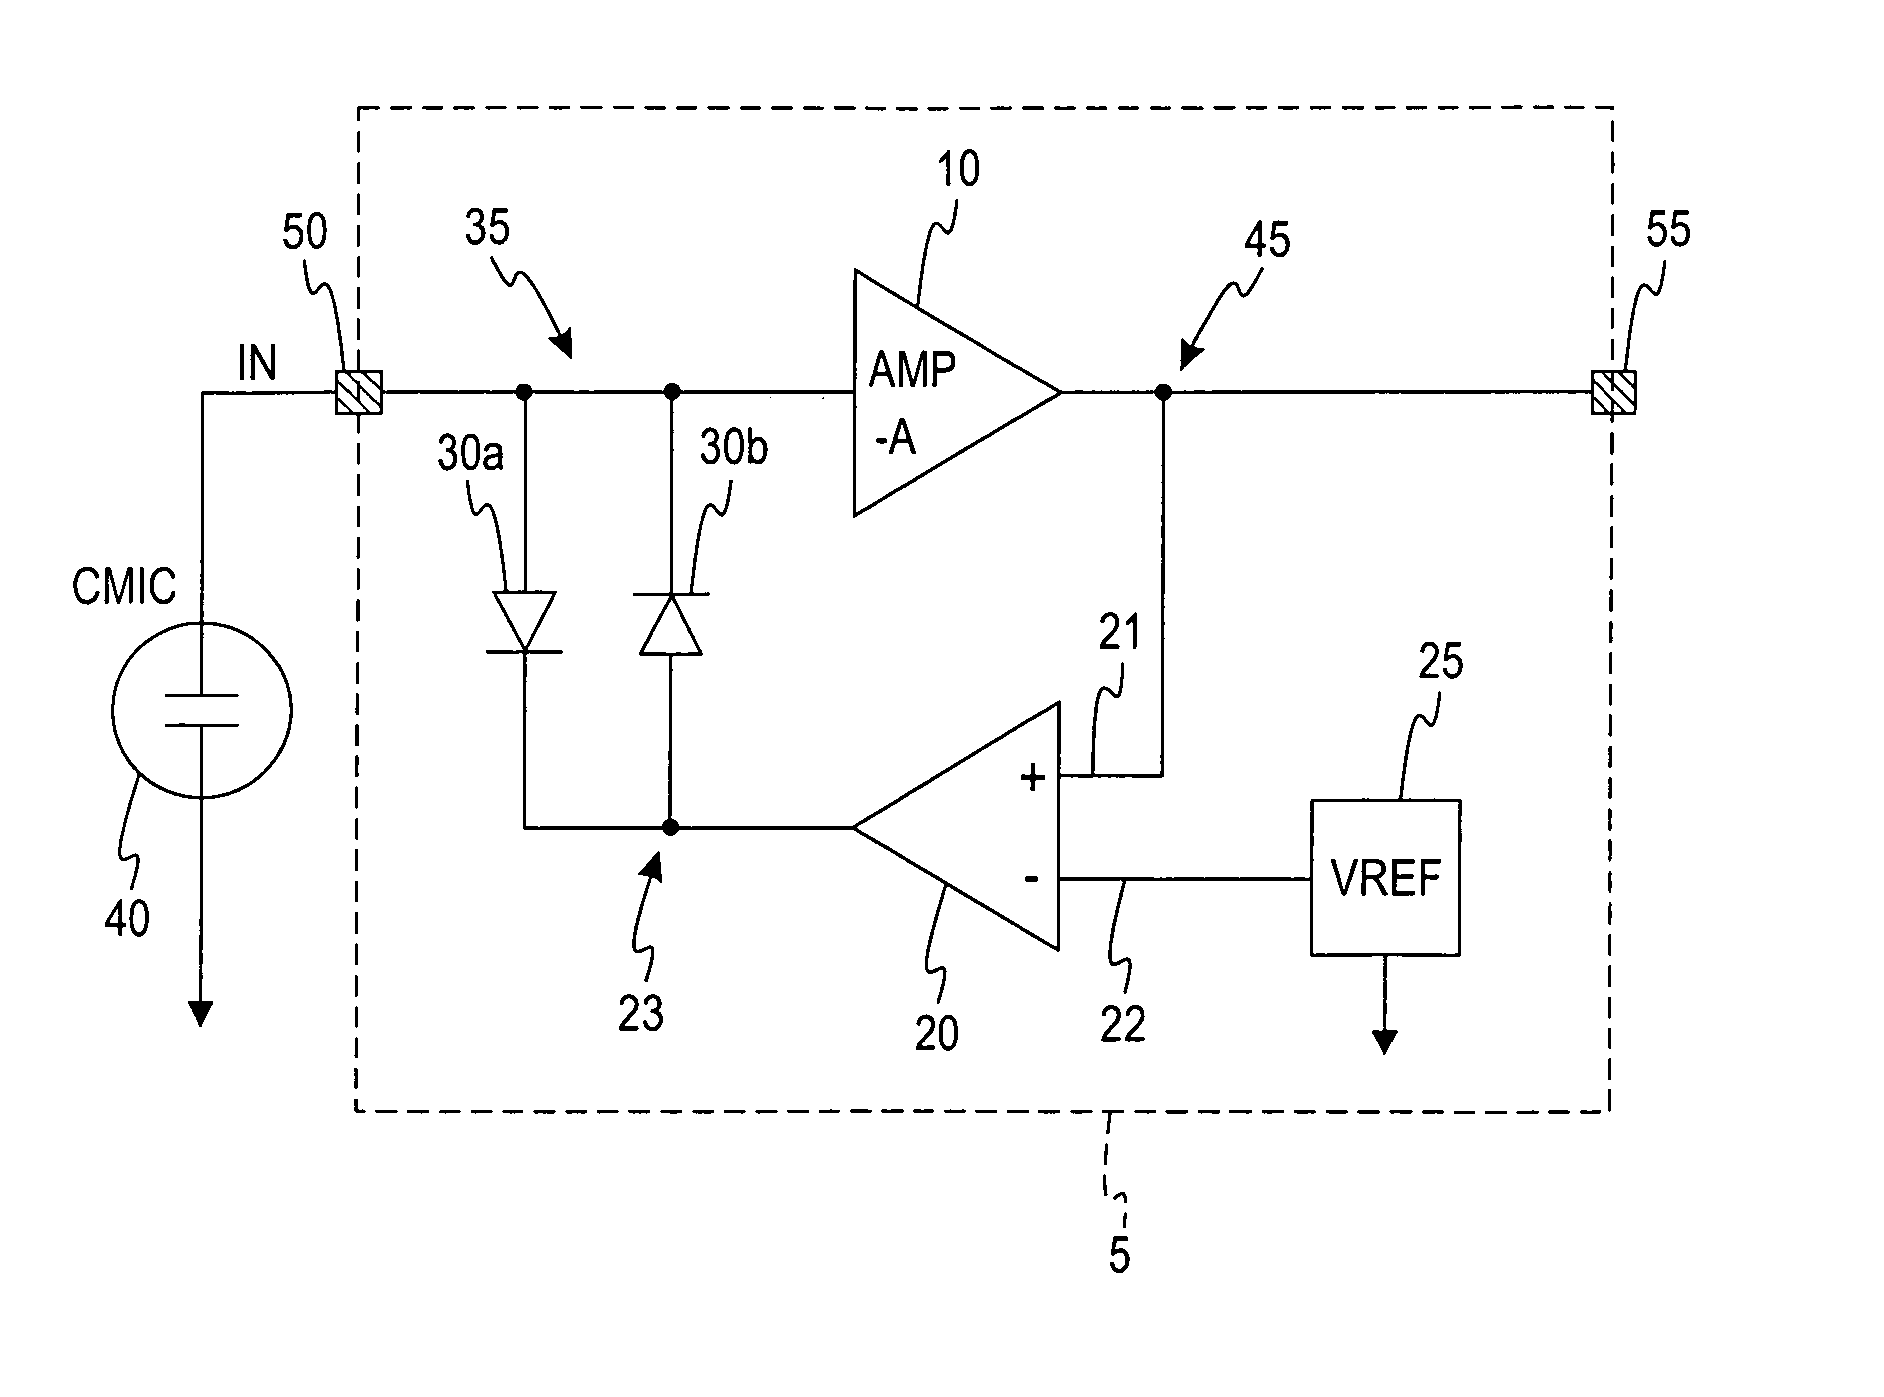 Amplifier circuit for capacitive transducers